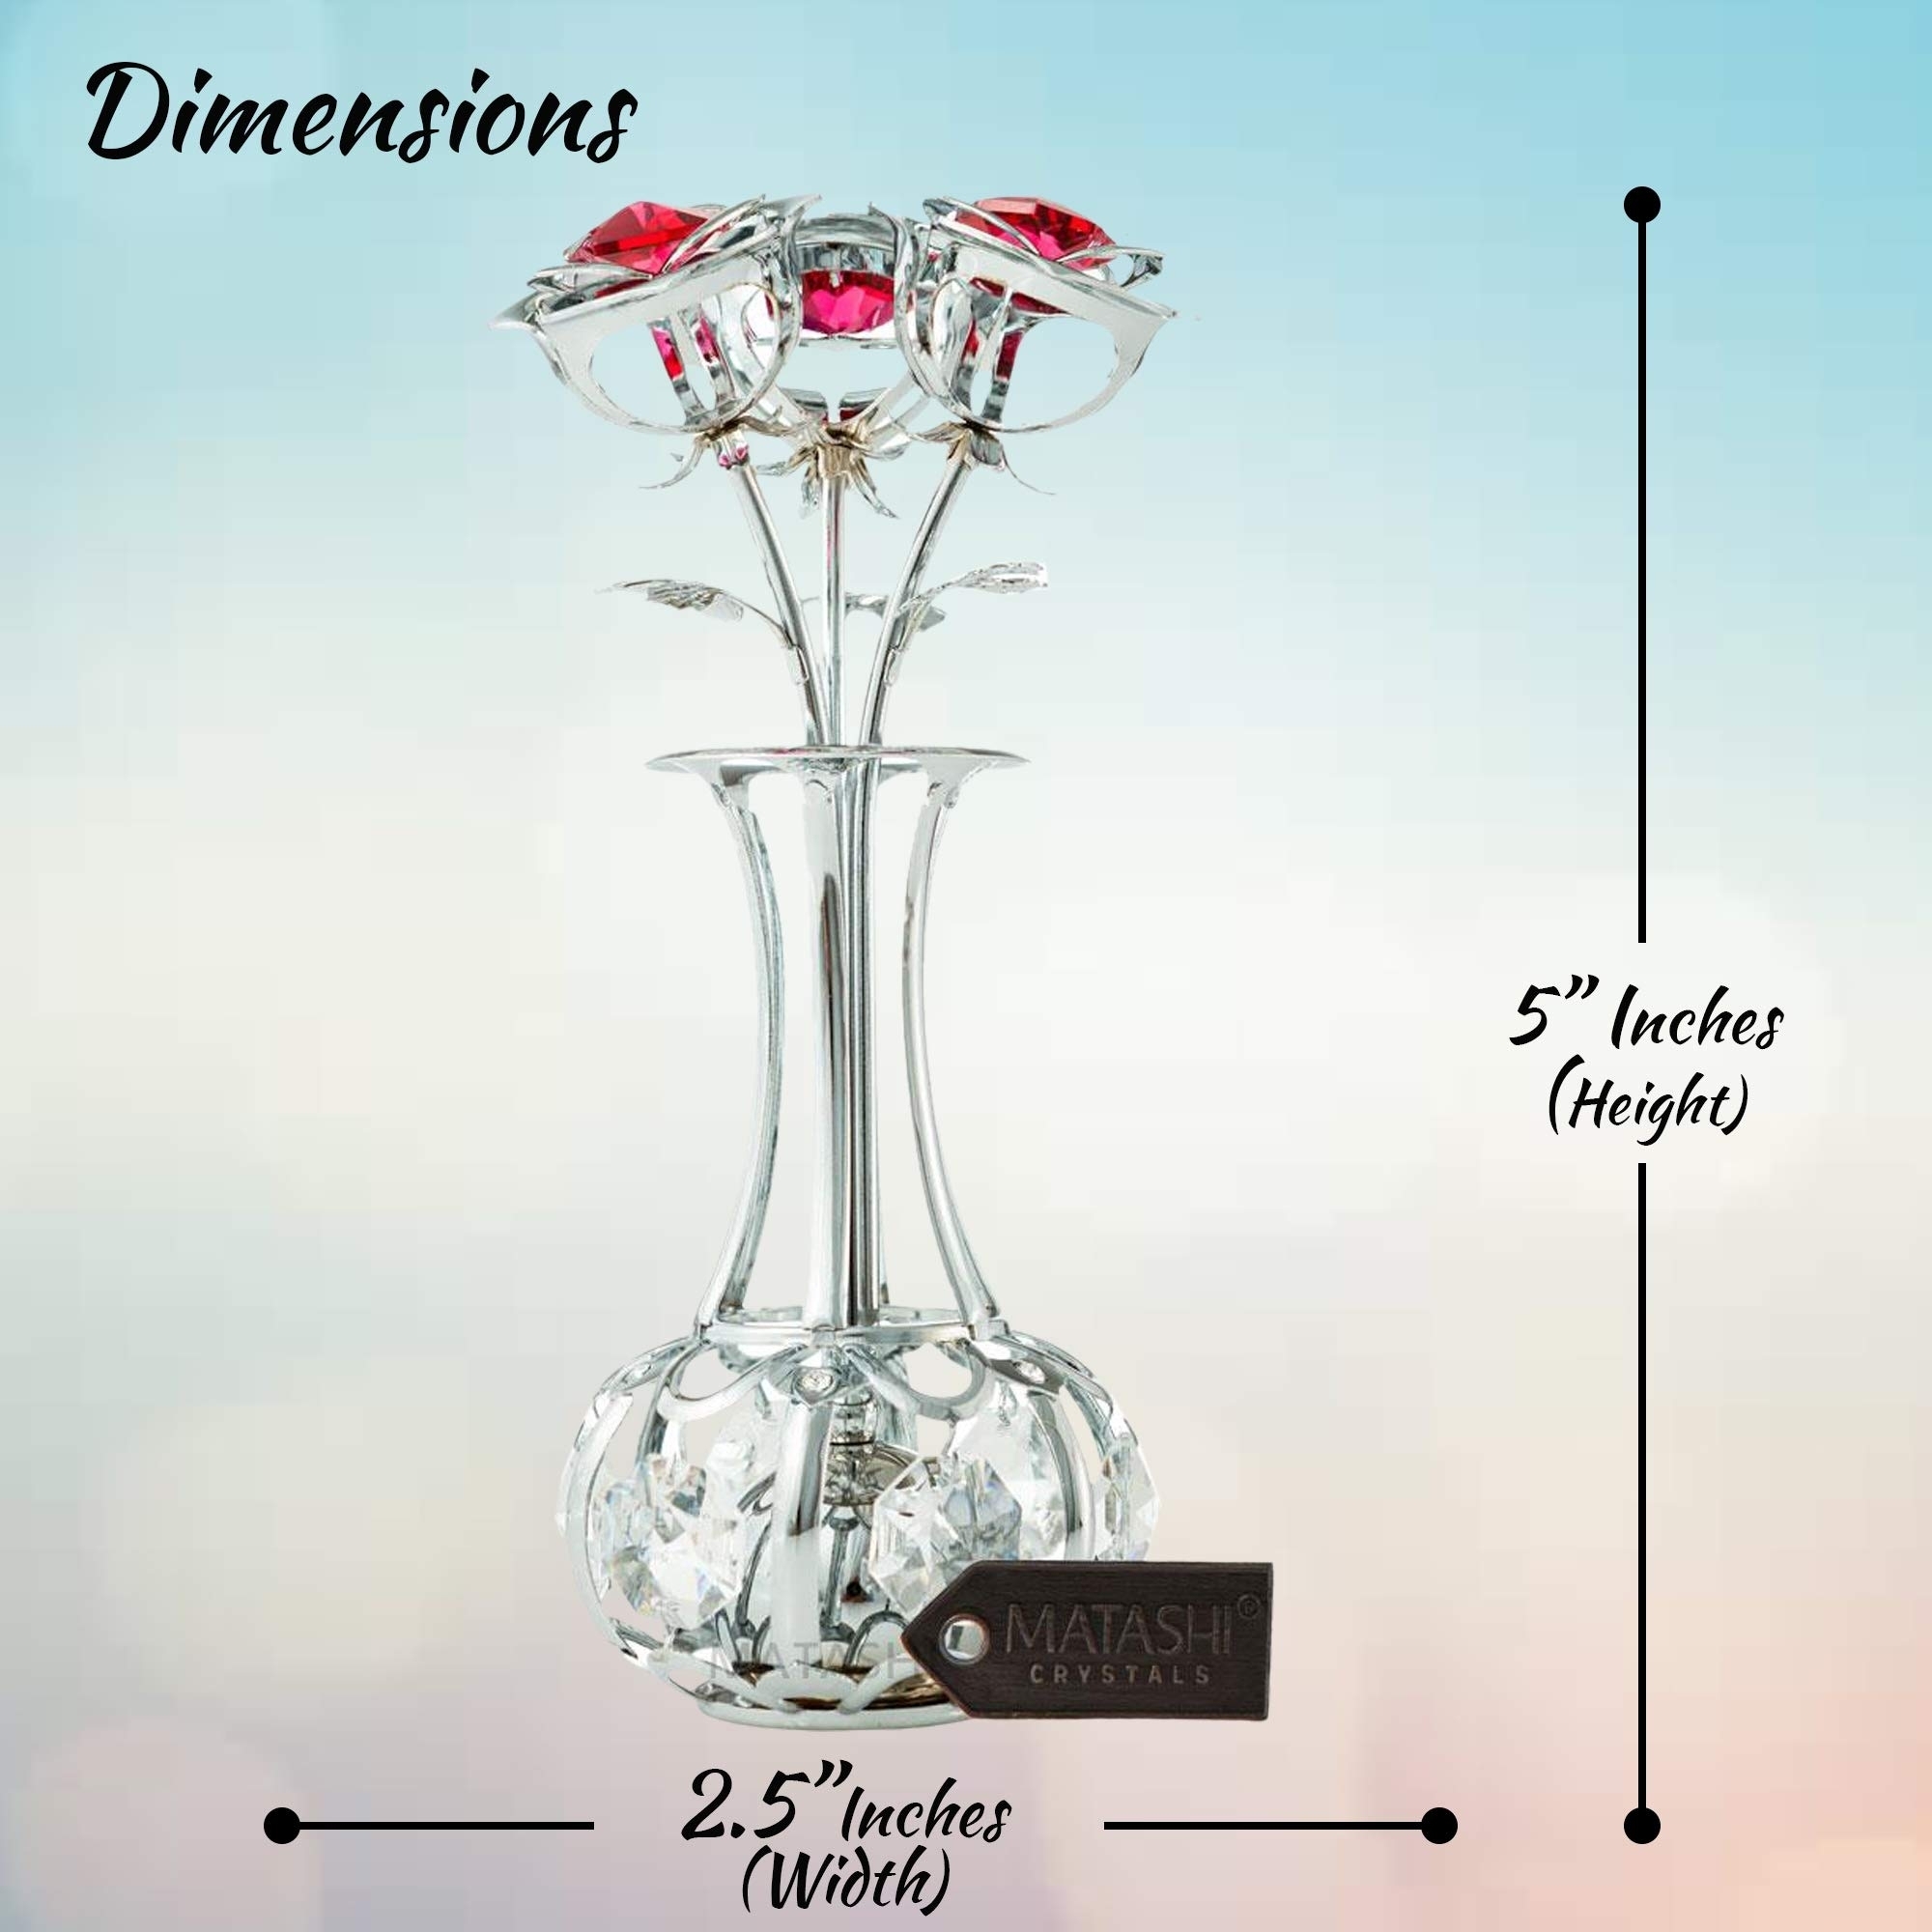 Matashi Chrome Plated Silver Flowers Bouquet & Vase W/ Red & Clear Crystals , Chrome-Plated Table Top Decorations , Metal Floral Arrangement